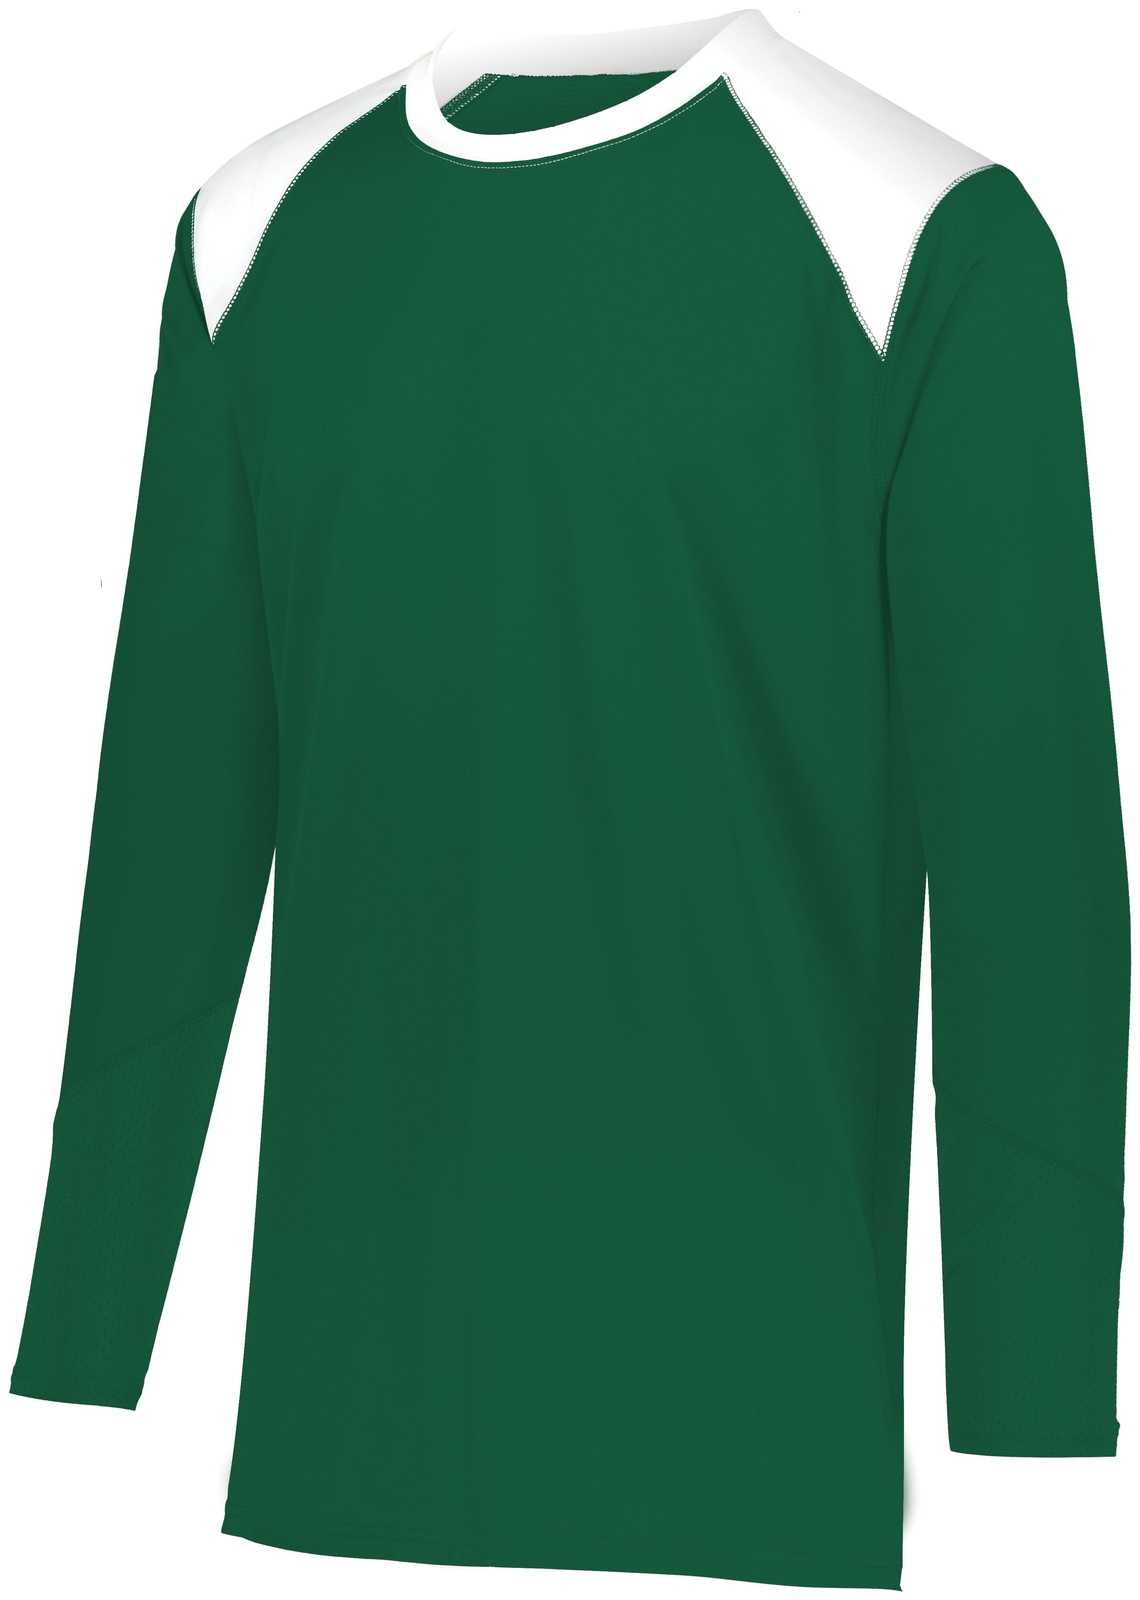 Augusta 1729 Youth Tip-Off Shooter Shirt - Dark Green White - HIT a Double